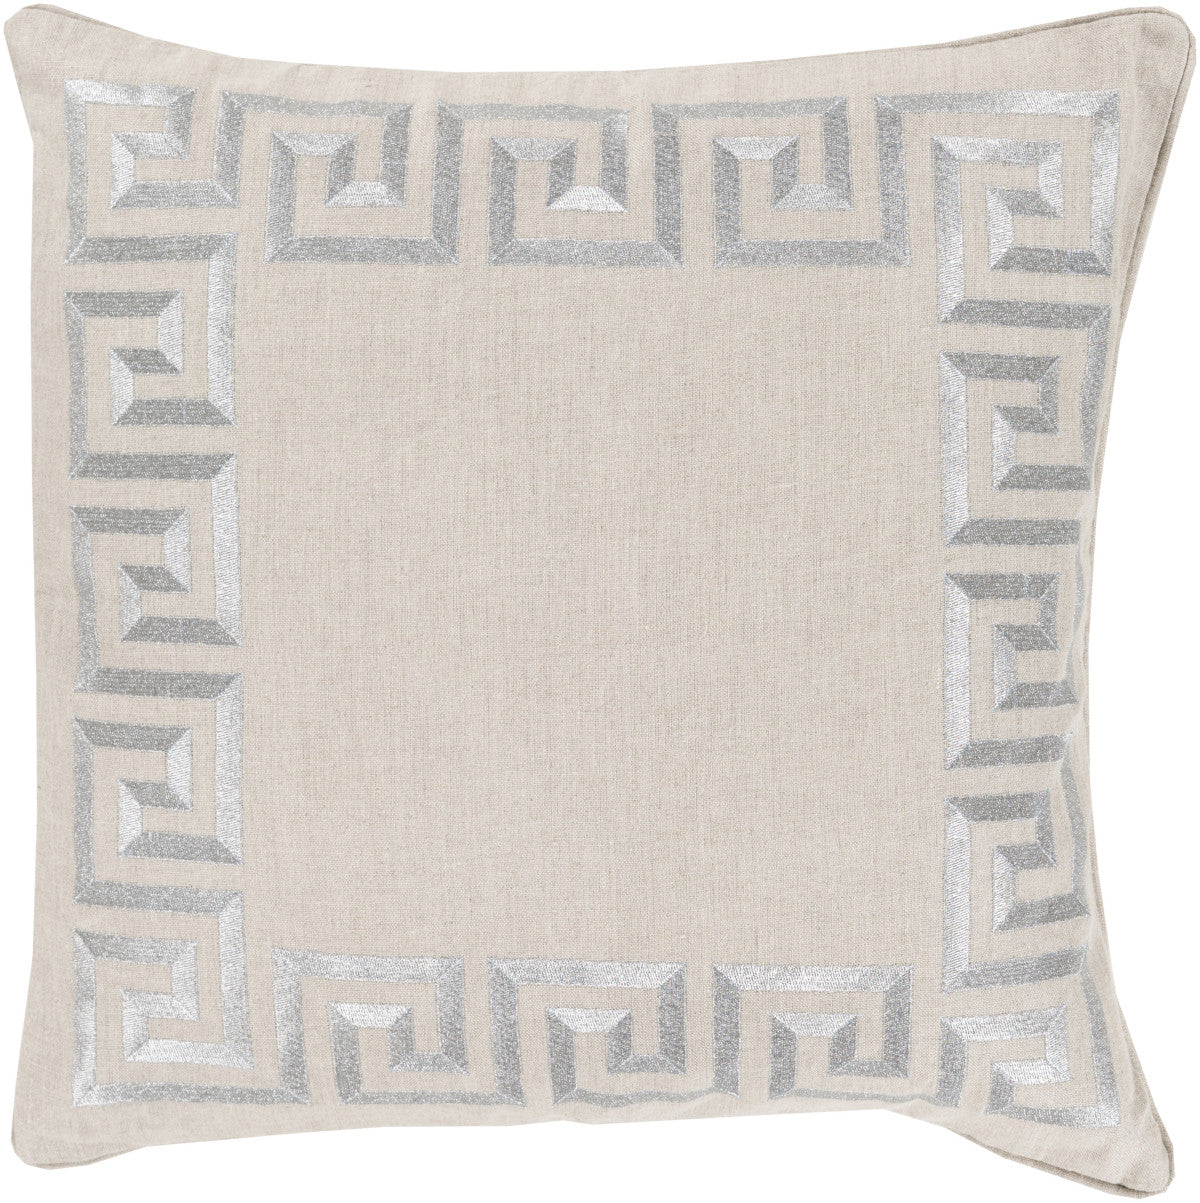 Surya Key Keeper of the Keys KLD-007 Pillow by Beth Lacefield